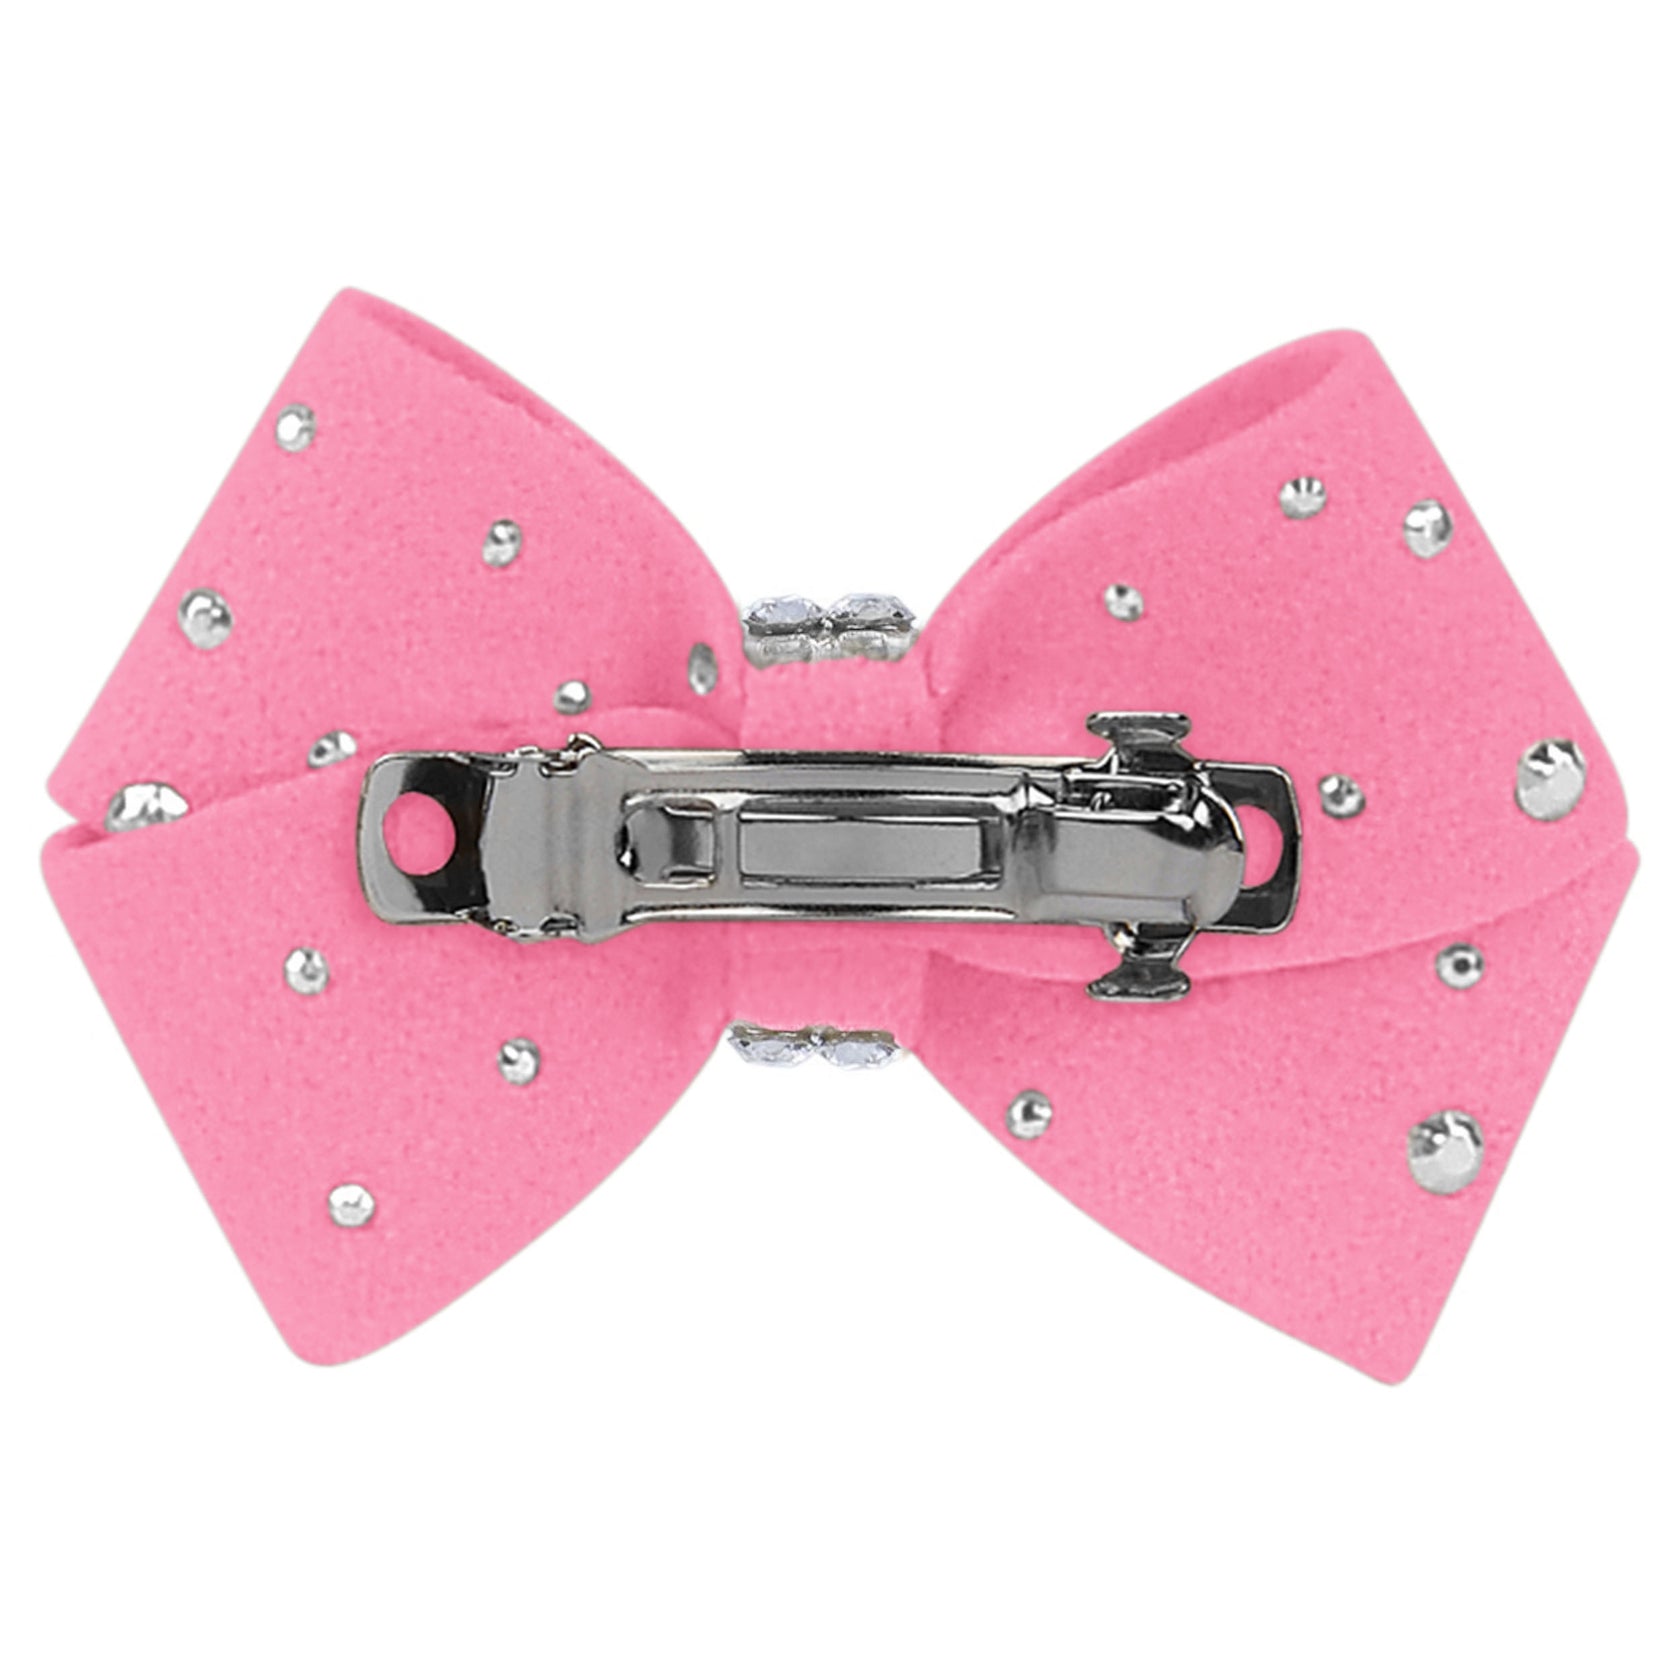 Nouveau Bow Dog Hair Bow with Silver Stardust